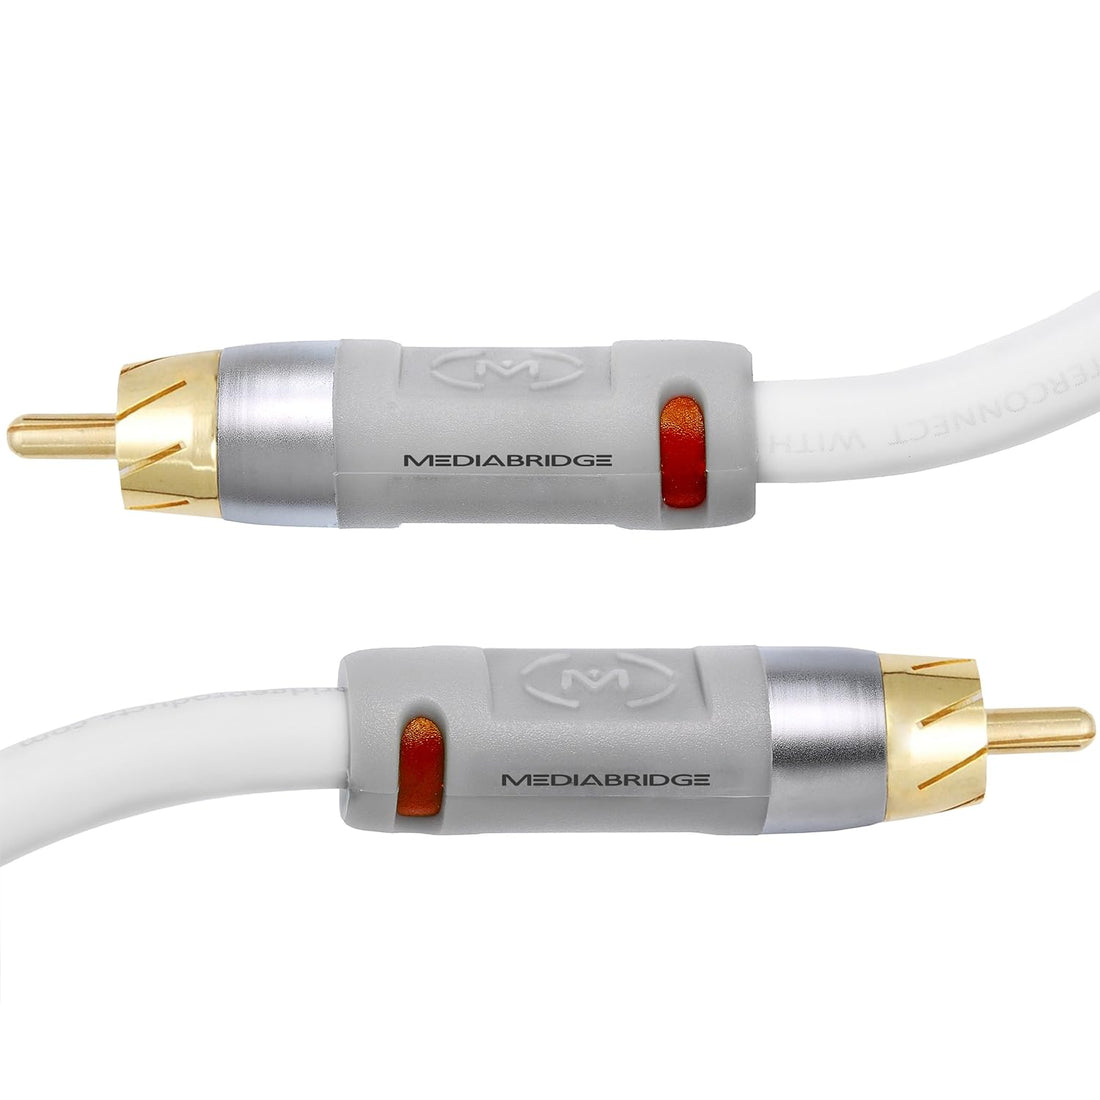 Mediabridge Ultra Series Digital Audio Coaxial Cable (25 Feet) - Dual Shielded with RCA to RCA Gold-Plated Connectors